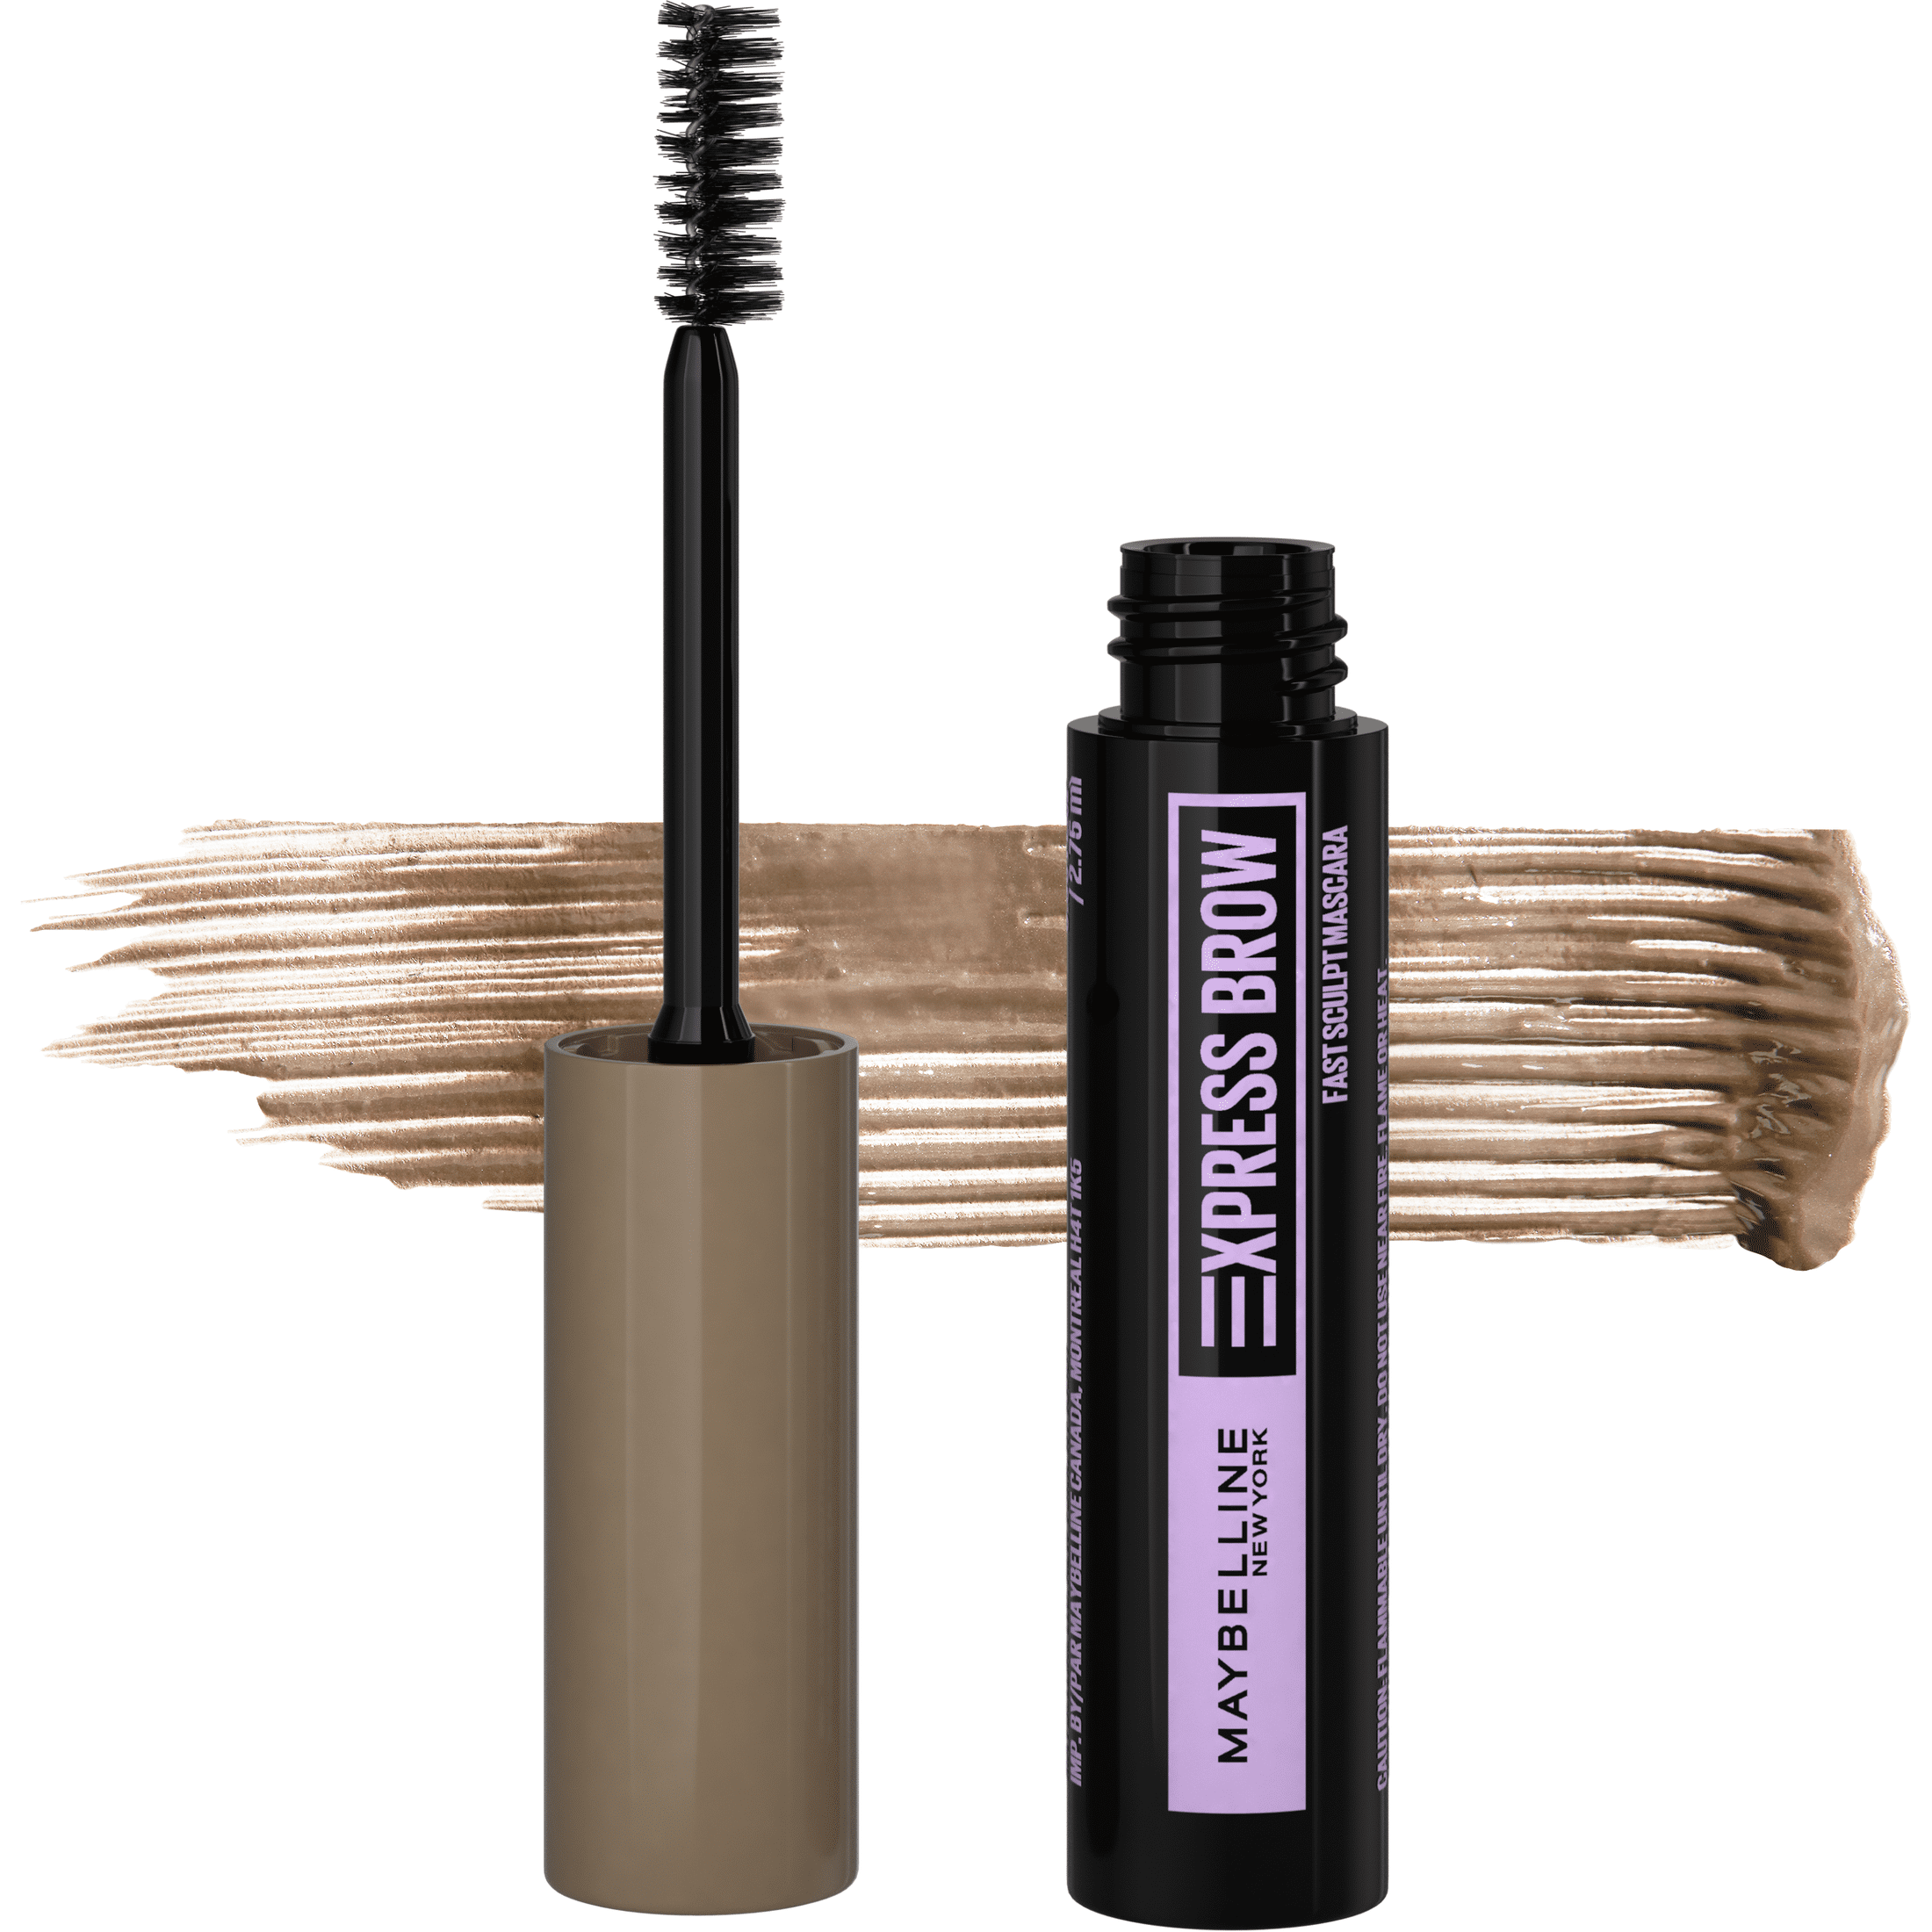 Makeup Maybelline Drama Brow